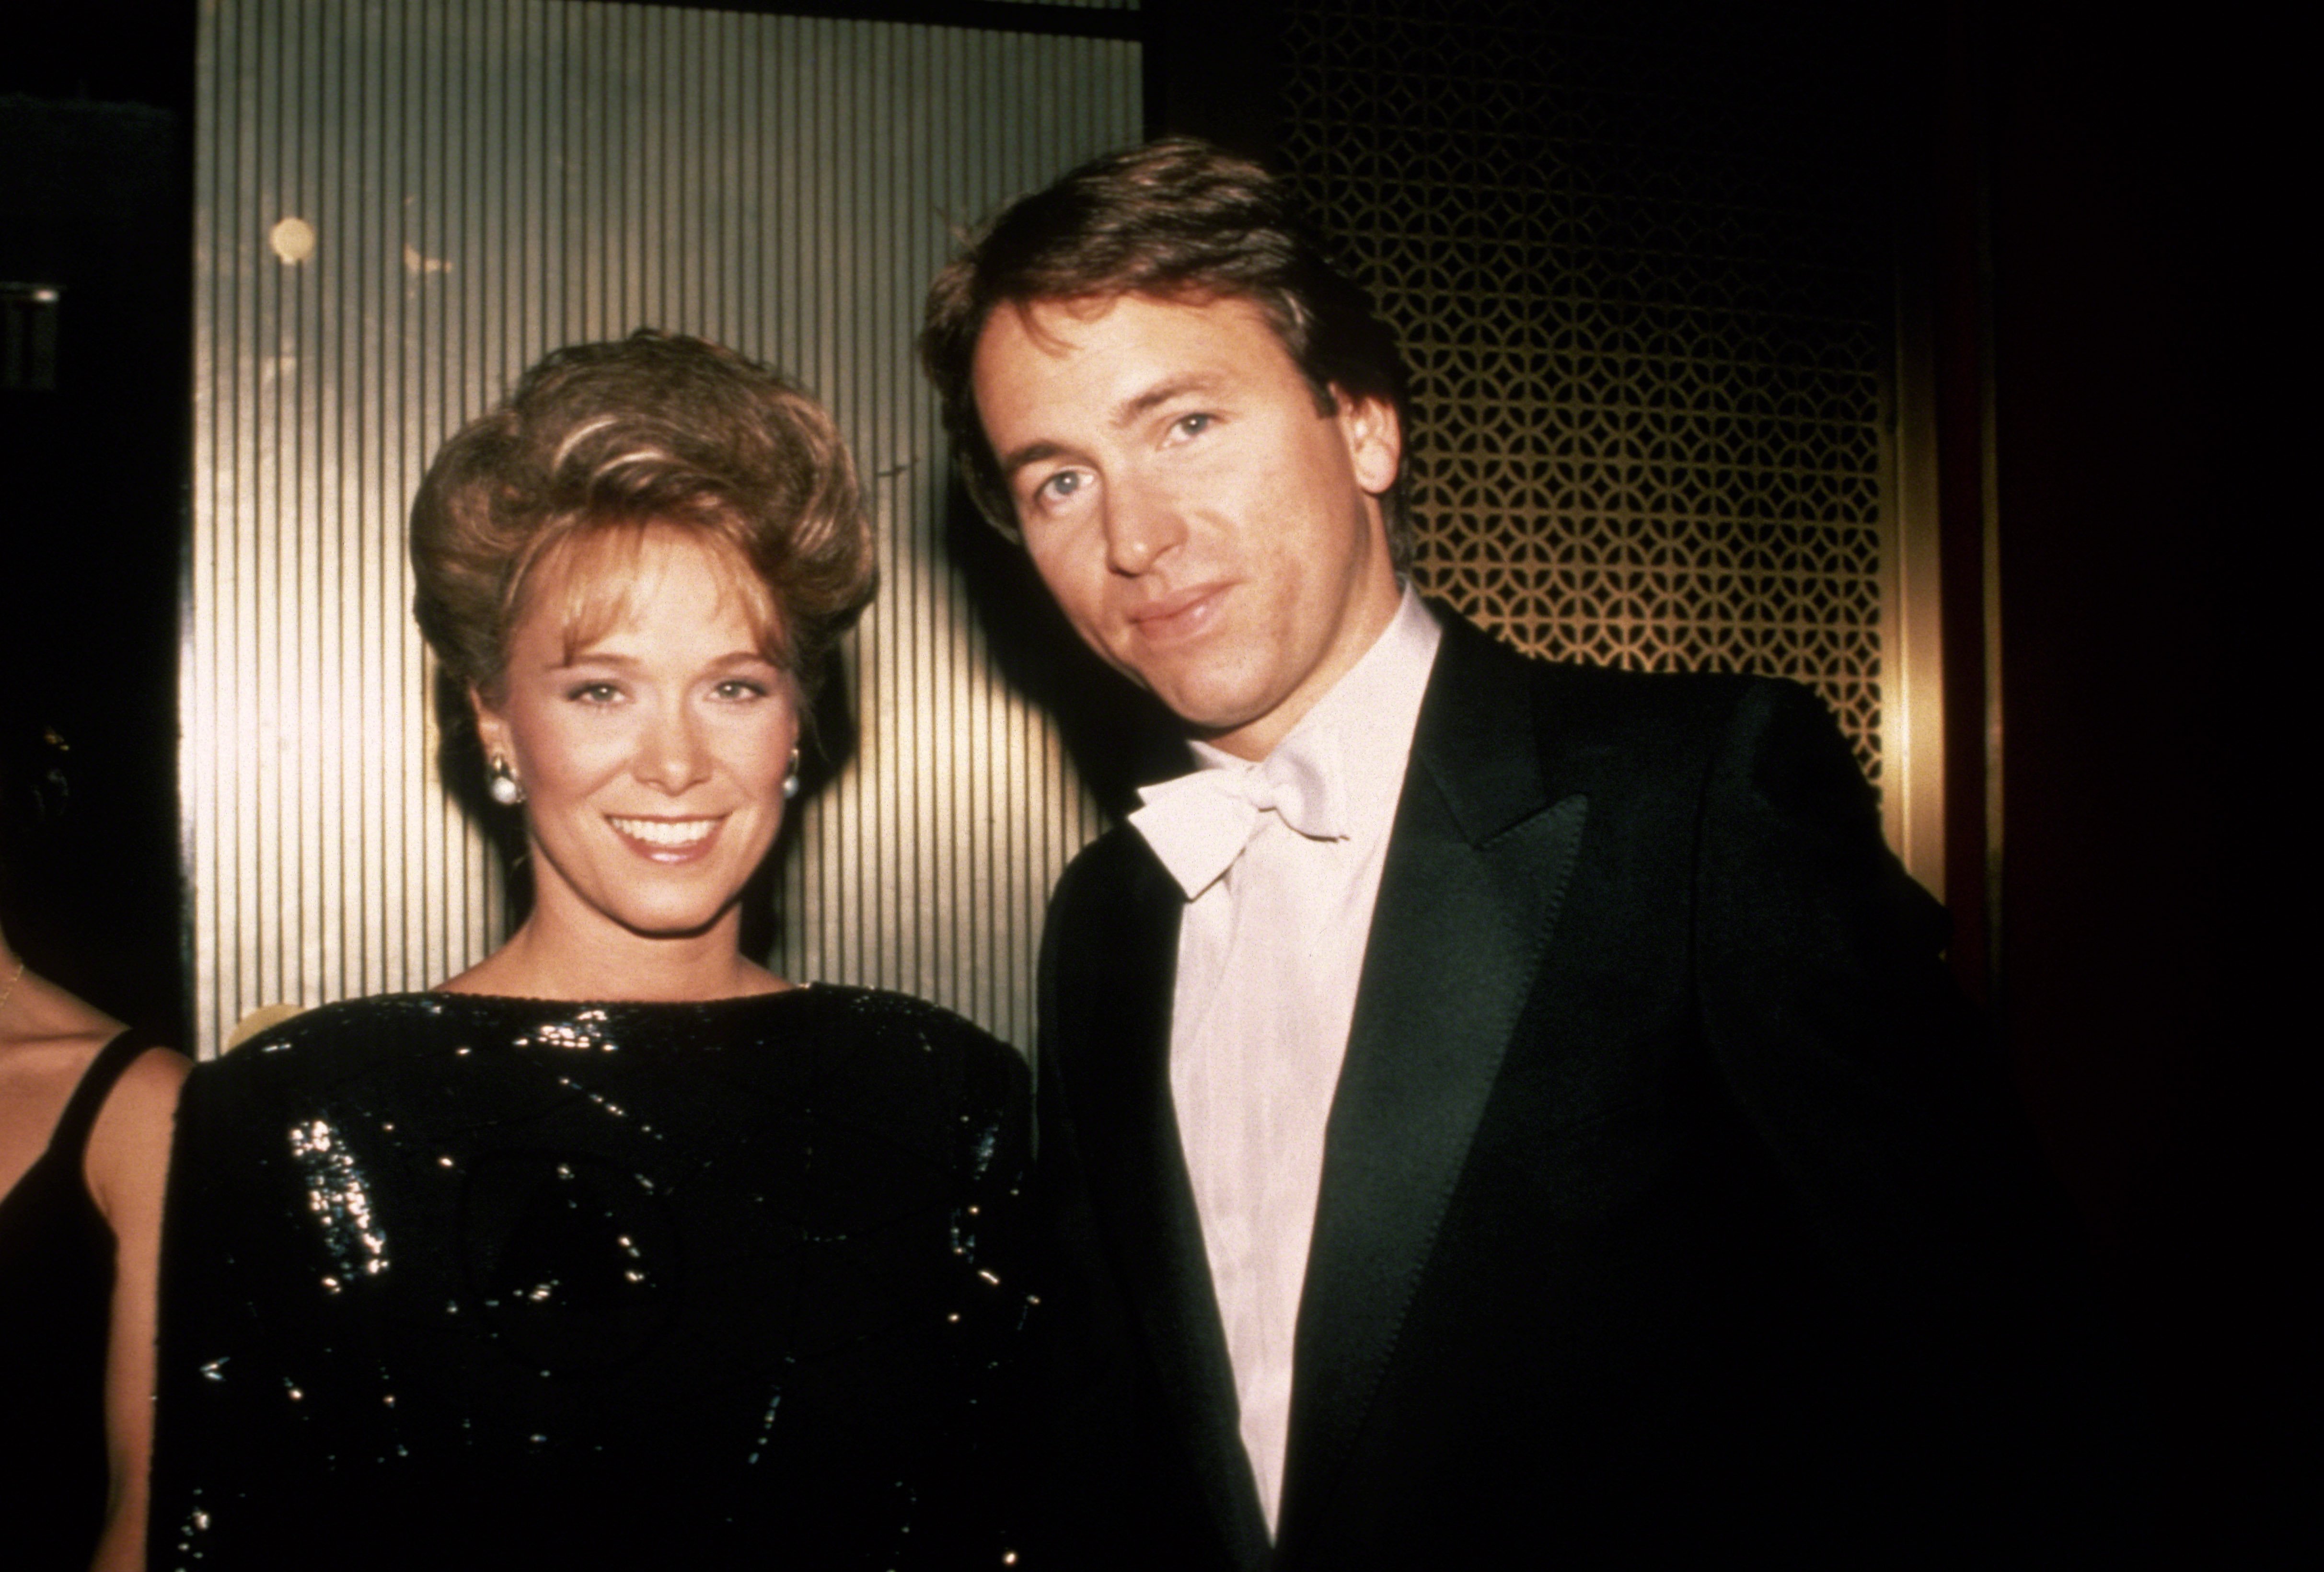 John Ritter and wife Nancy circa 1983 in New York City. | Source: Getty Images